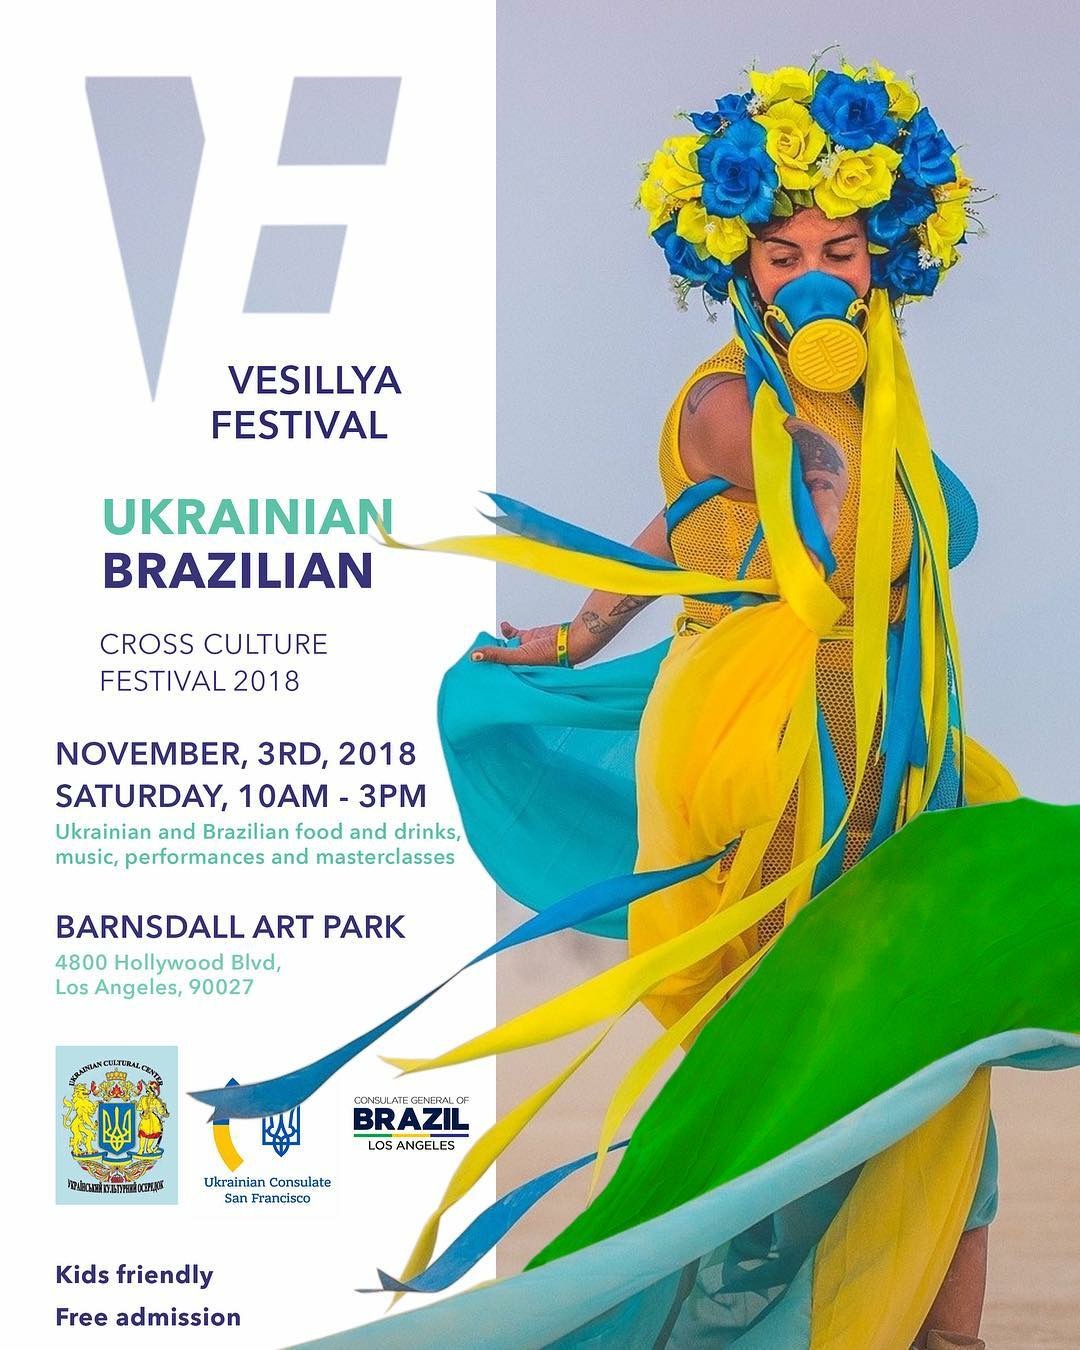 An advertisement inviting people to the Ukrainian-Brazilian festival on November third, 2018 in Barnsdall Art Part. There is a picture of a woman wearing blue-and-yellow dress, flowers and ribbons.